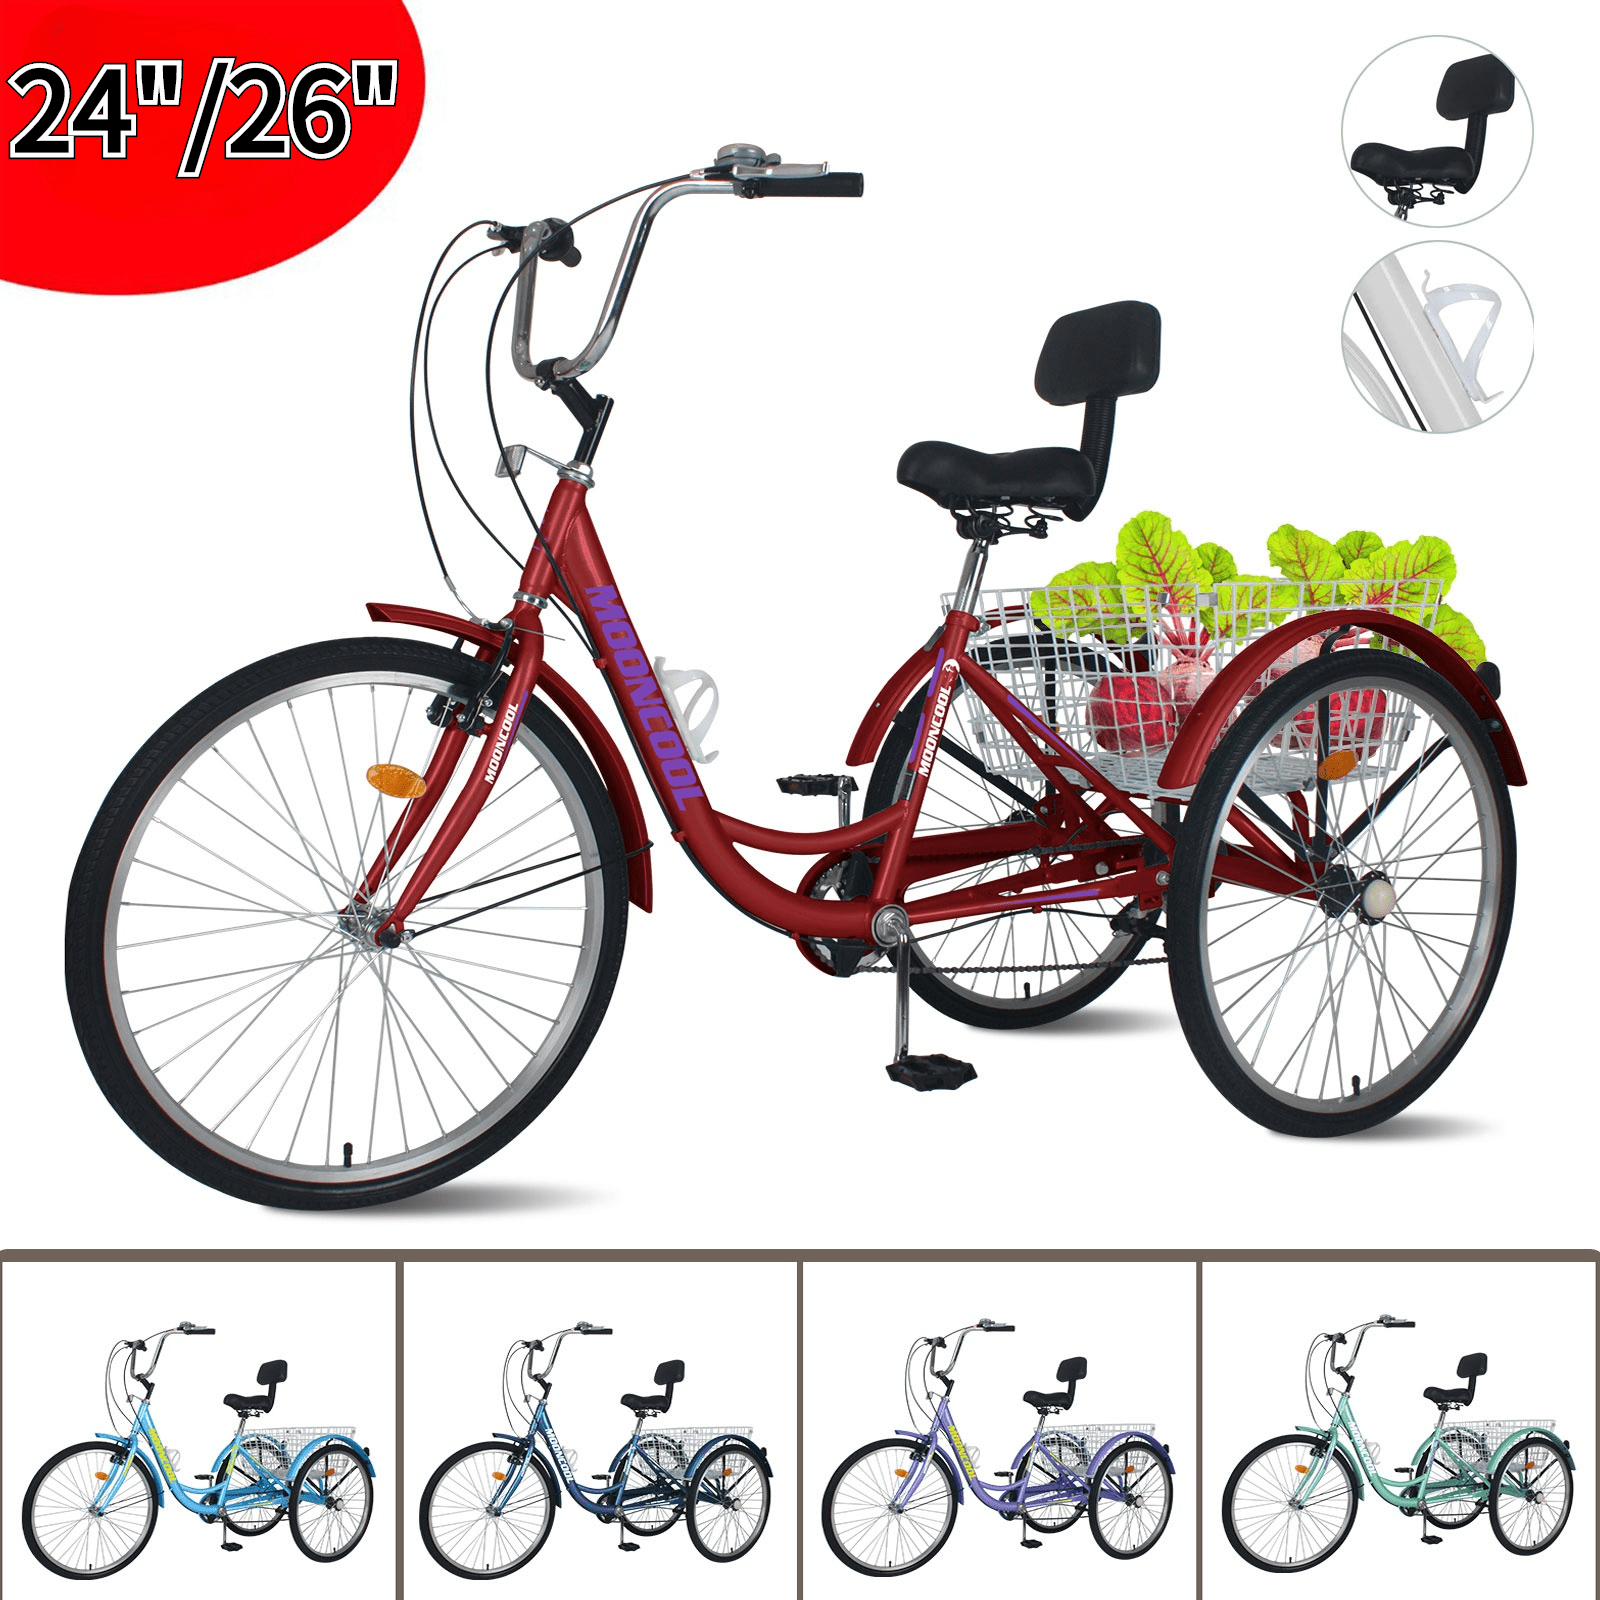 Tricycle Adult 24/26'' 3Wheel Bicycle 7Speed Trike Bike Basket&Bell for shipping 